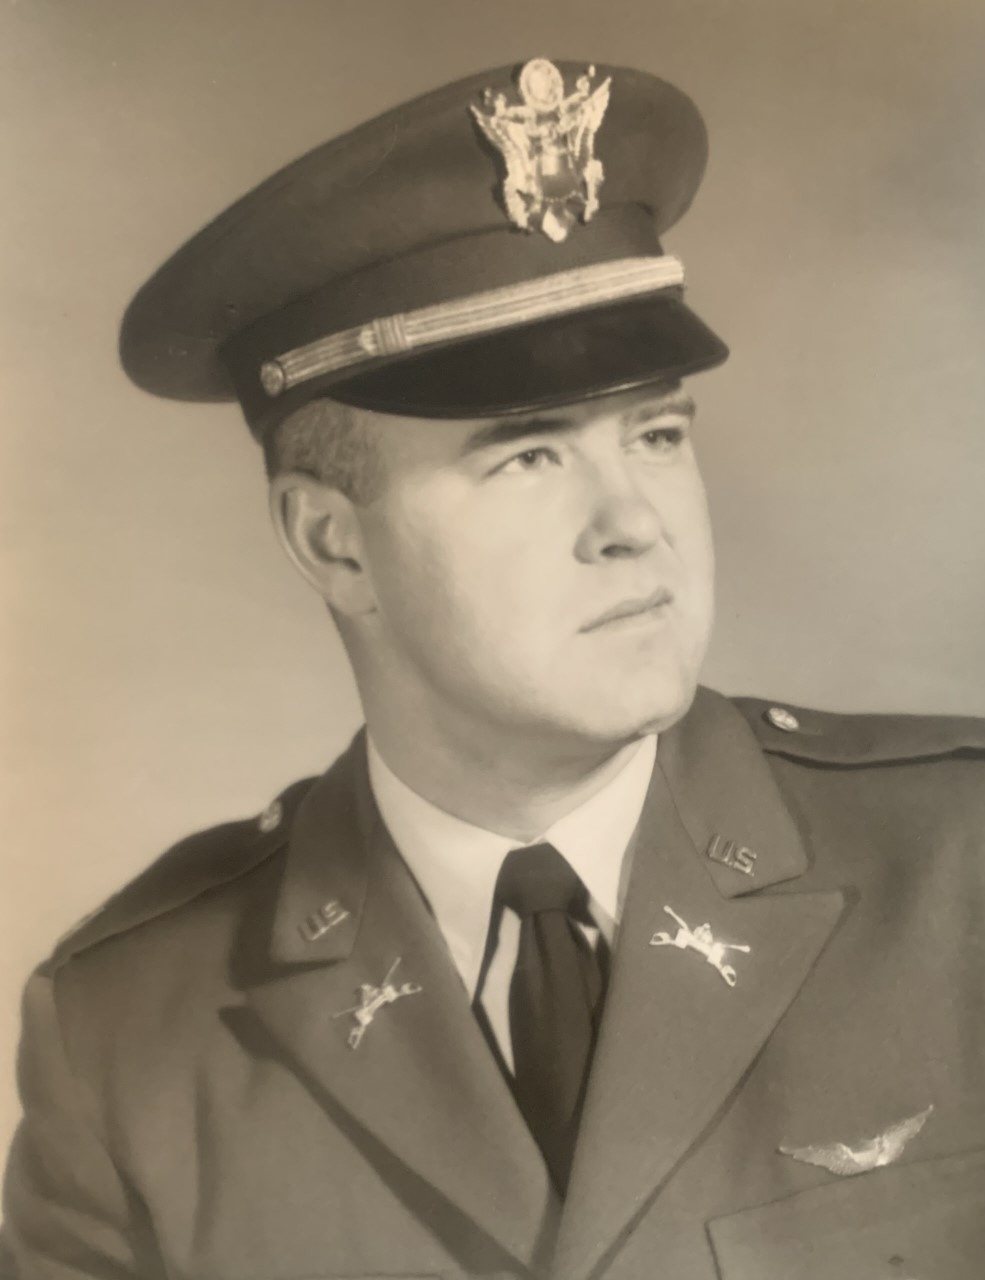 Obituary information for Colonel John Ray Ghere